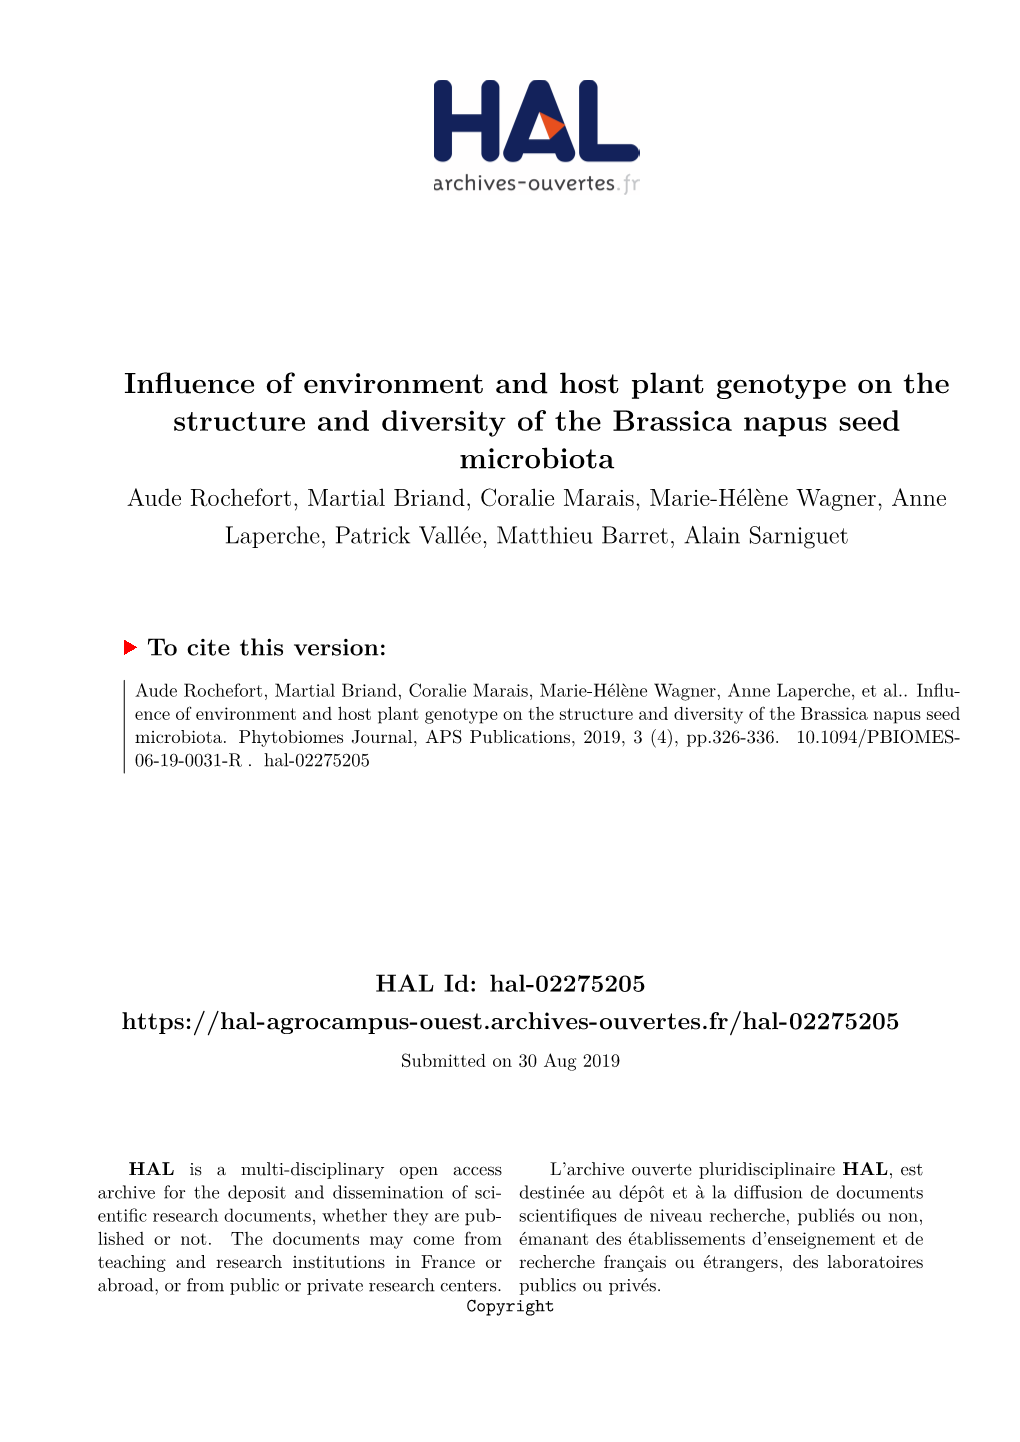 Influence of Environment and Host Plant Genotype on the Structure And